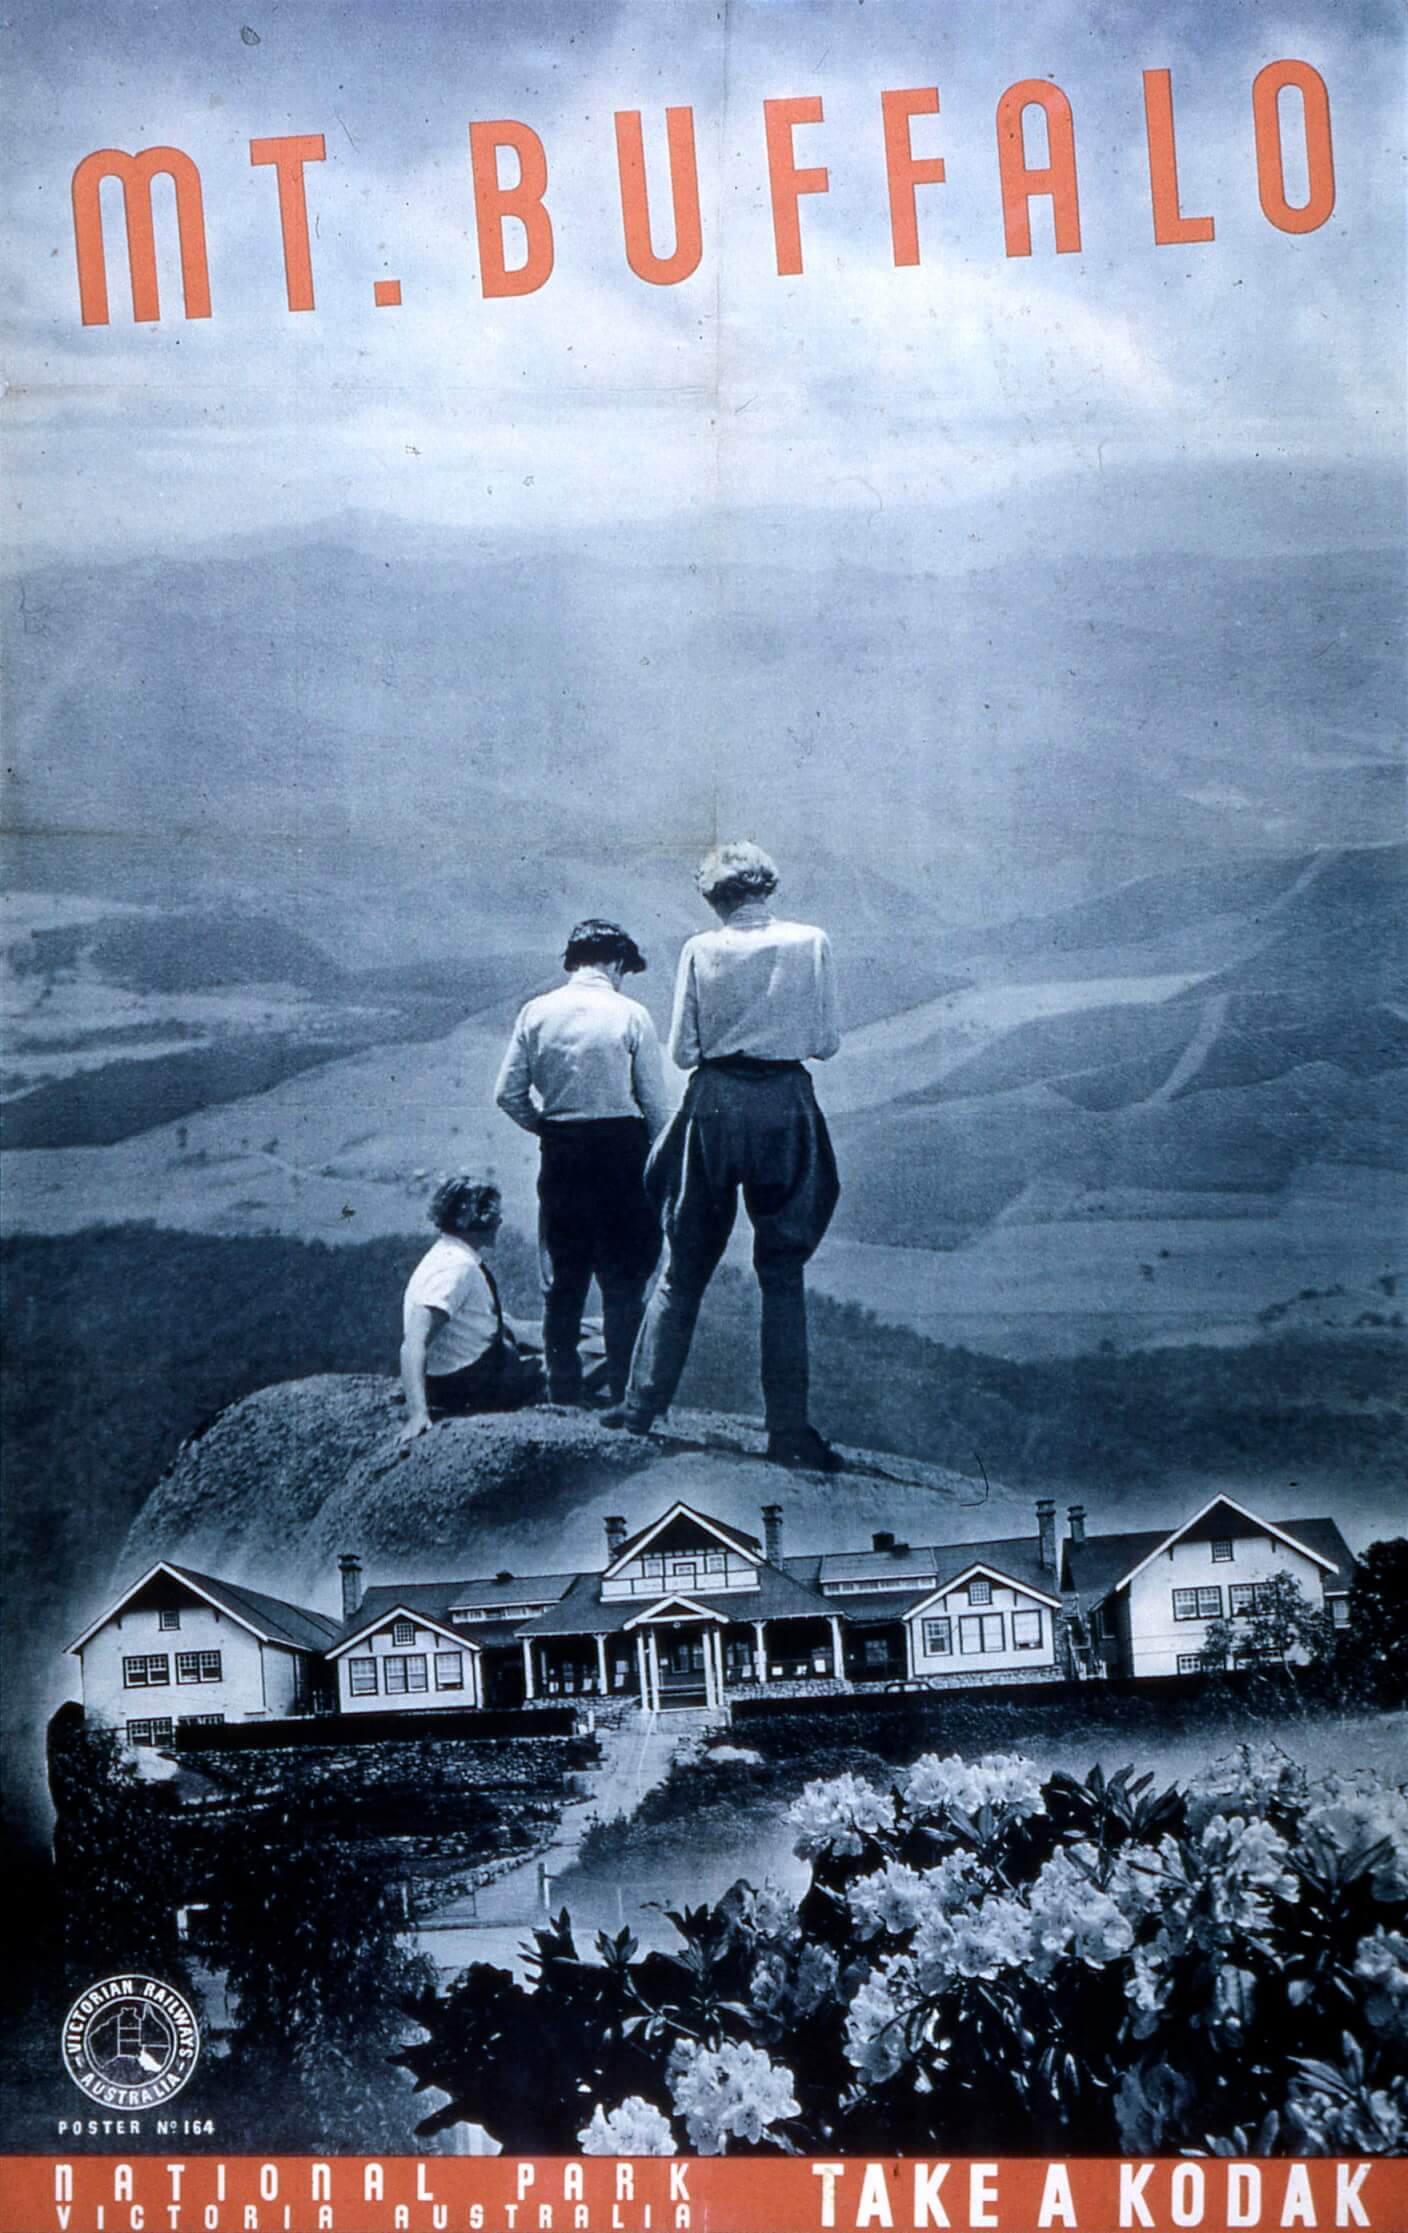 Travel poster for Mt. Buffalo is a composite image toned in blue and white with wording in a red. The upper, includes a vista looking over a mountainous range with 3 women on a hilltop or rock in the middle ground. One is sitting on the ground and 2 standing. The lower half of the image shows a sprawling ranch style building. in the lower right corner is an image of a rhododendron bush in flower.